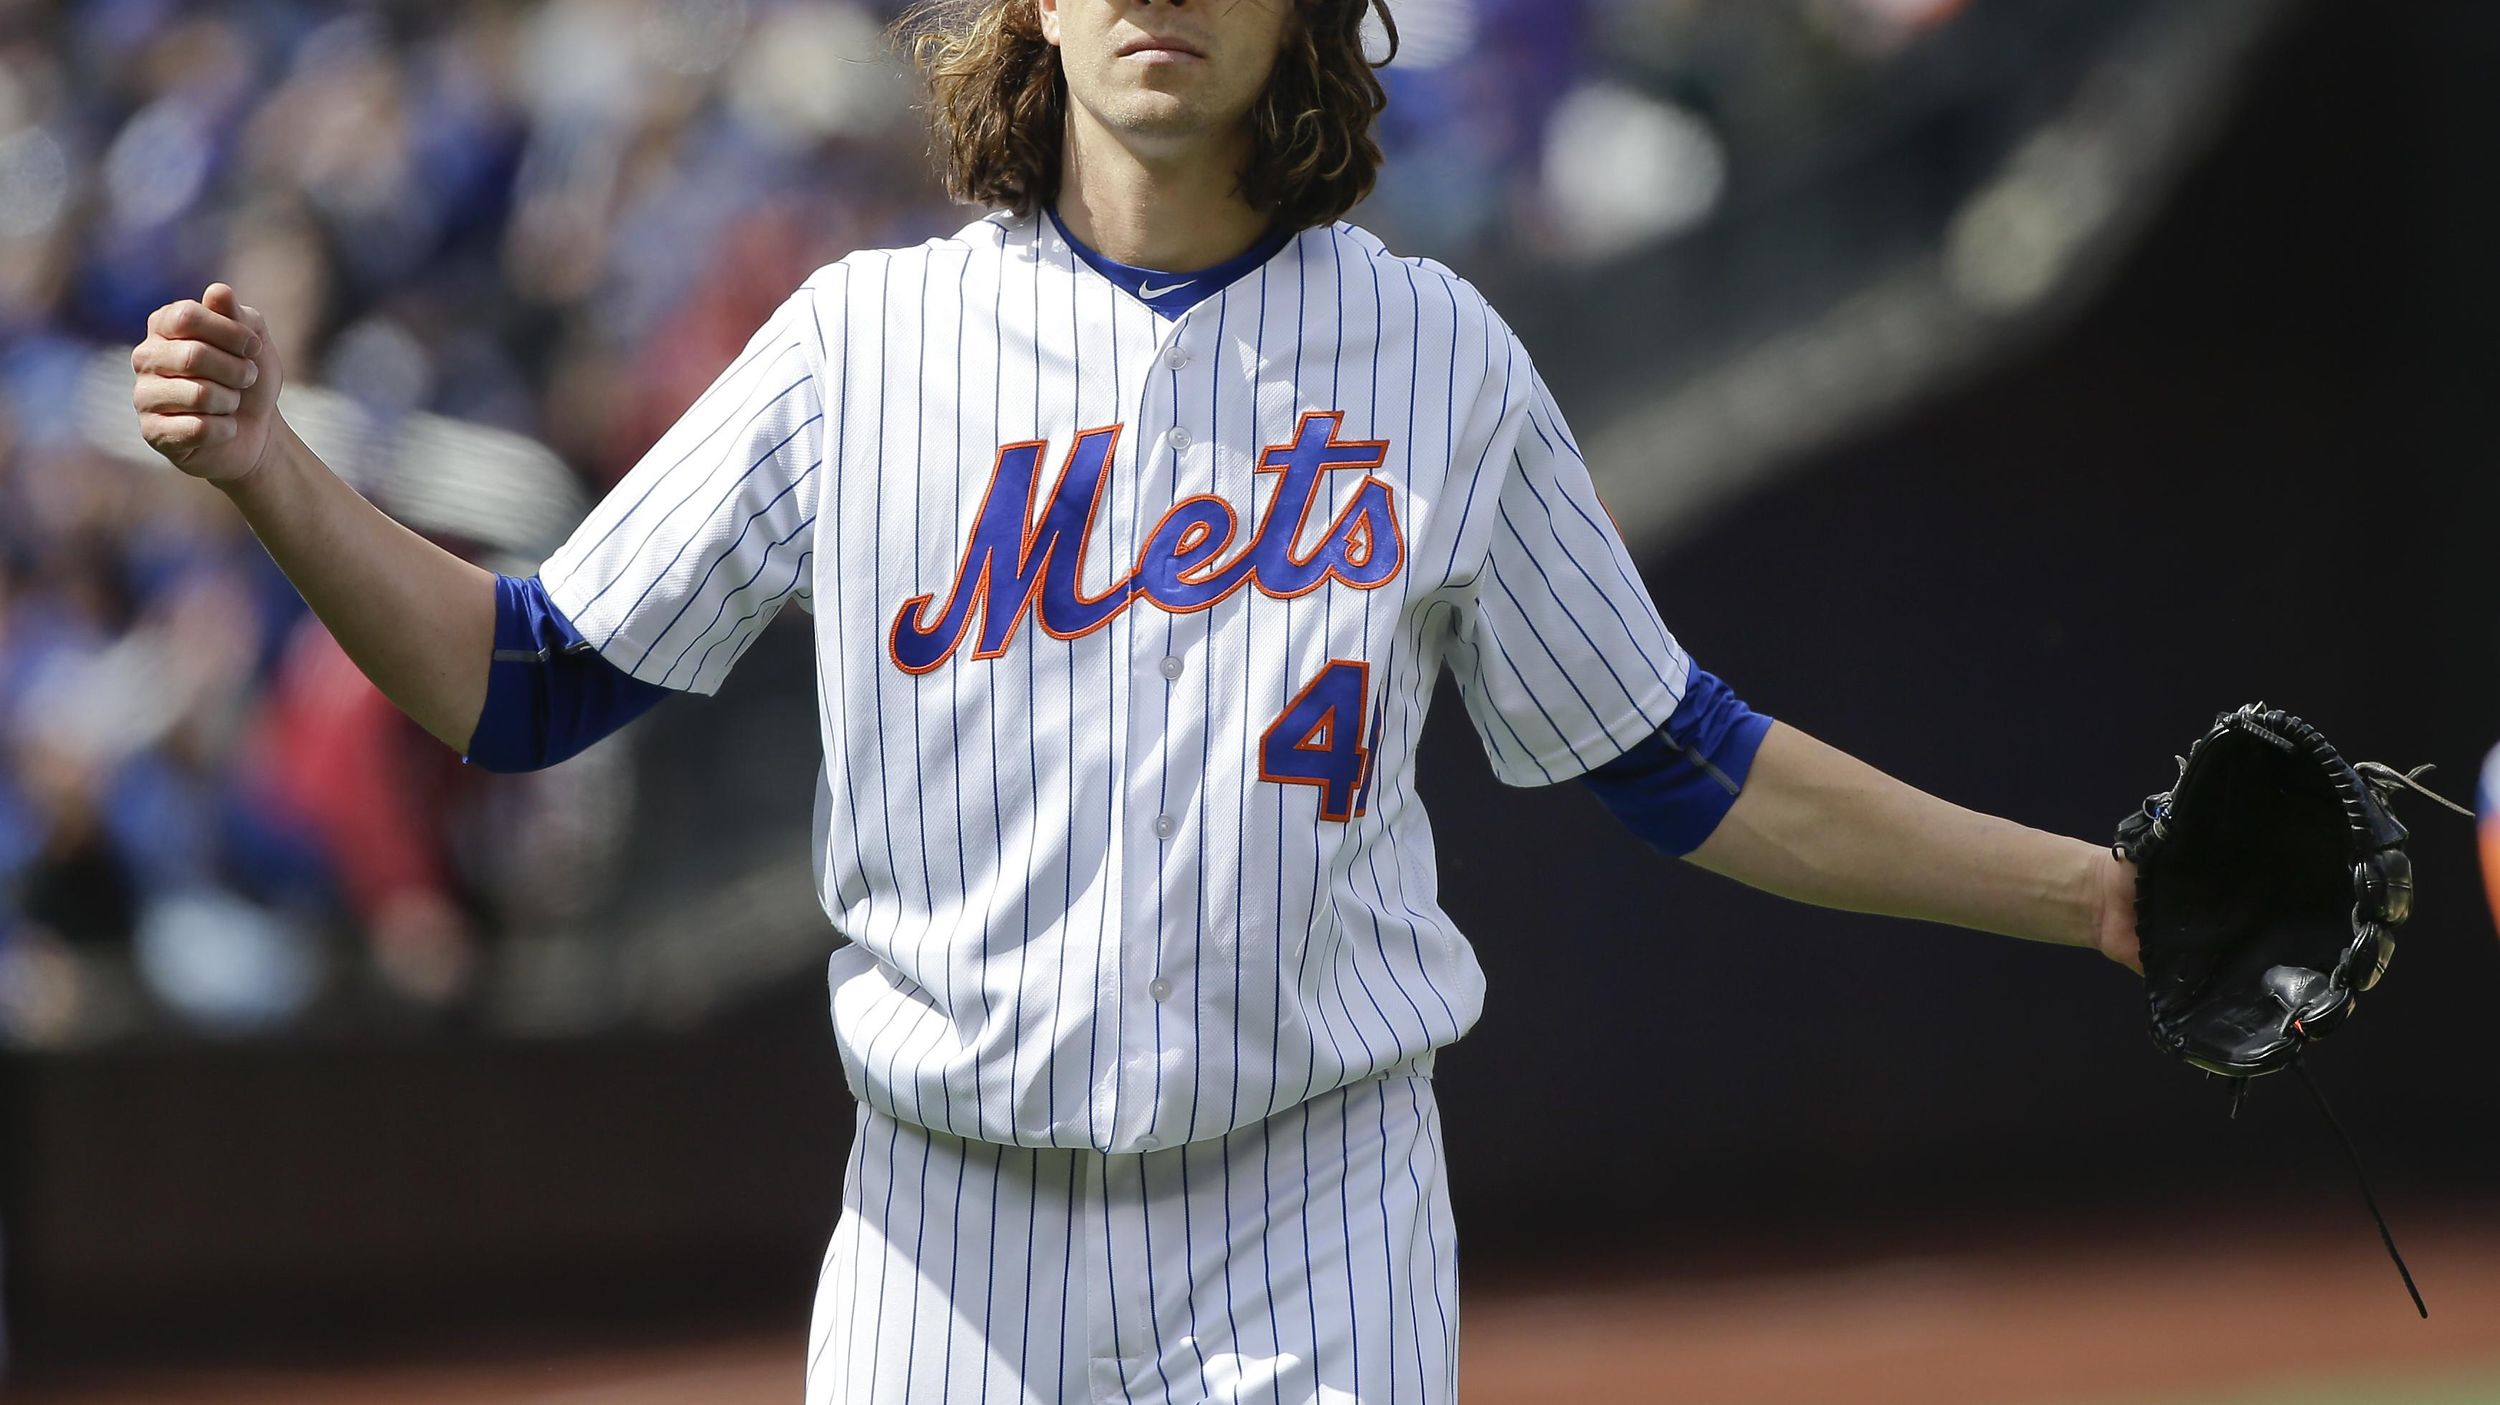 Sore Stetson product deGrom to miss next turn in Mets' rotation